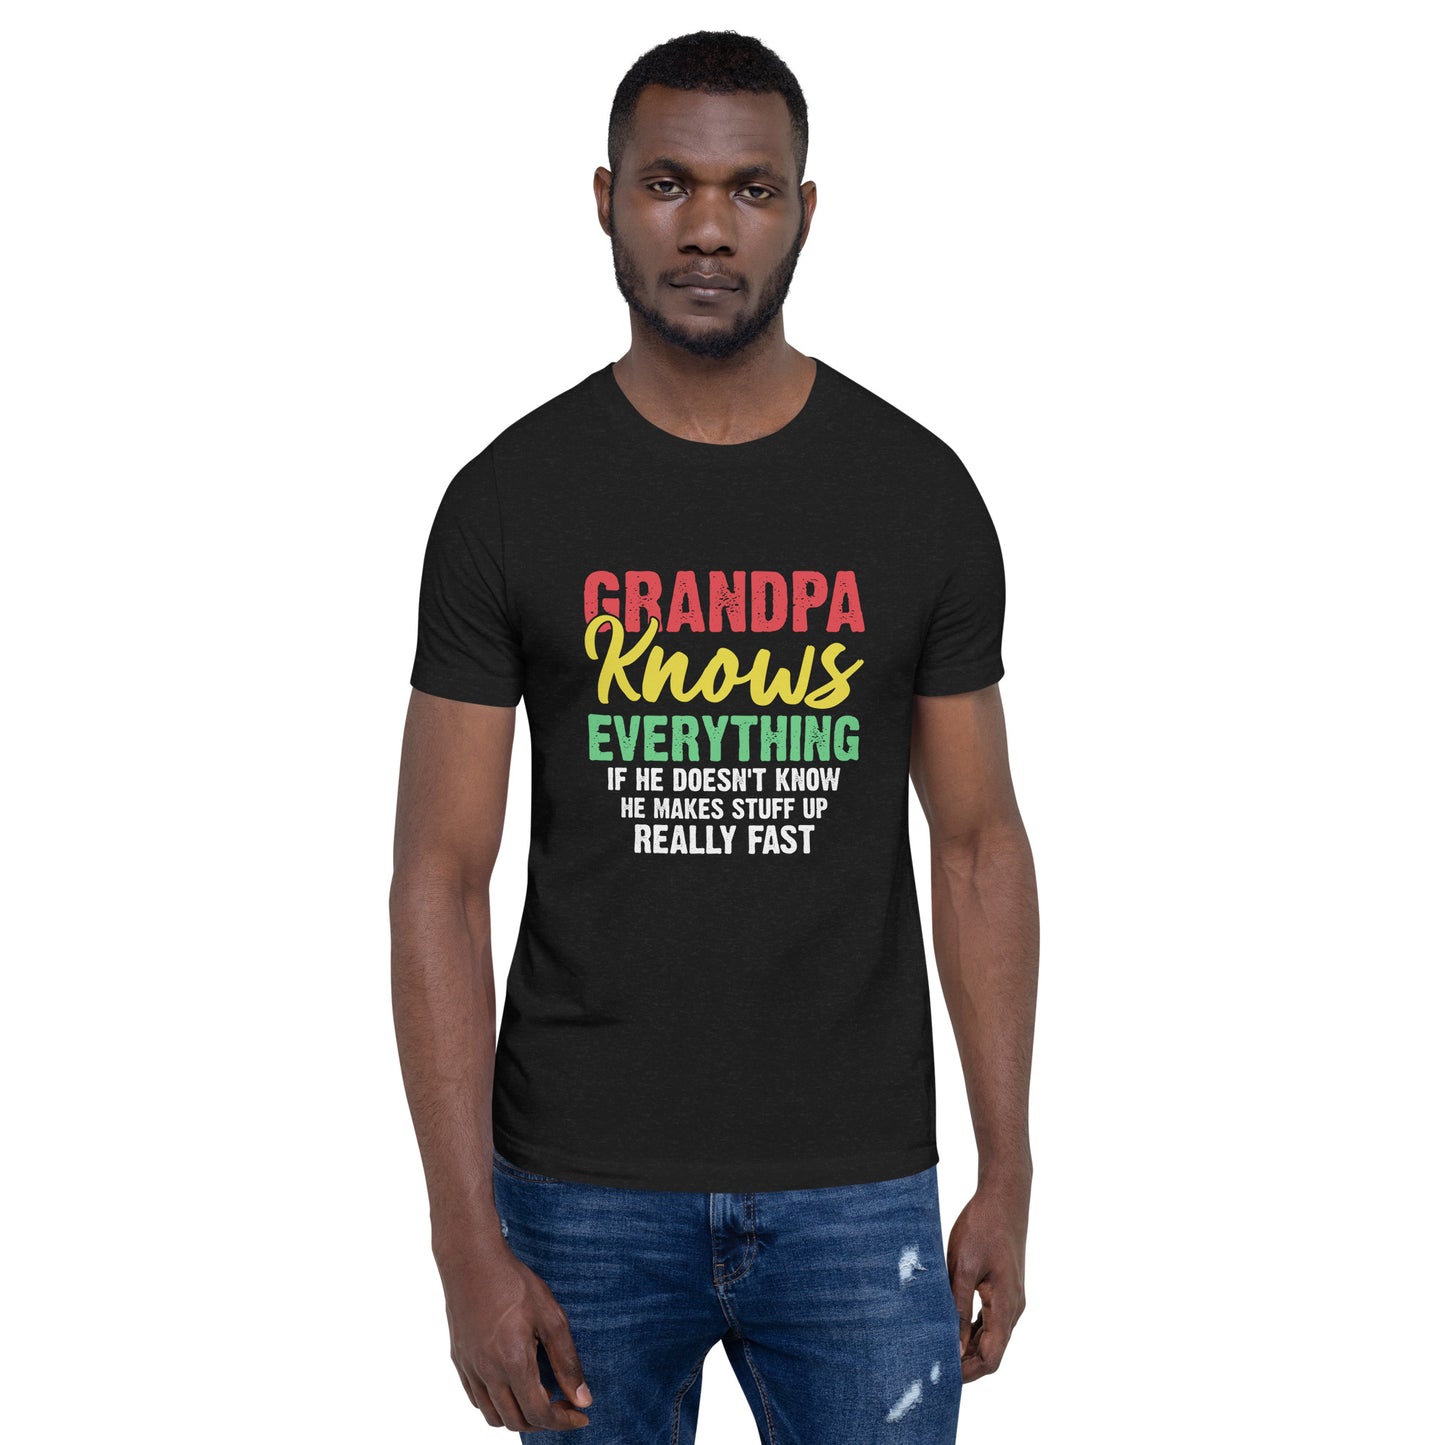 Grandpa Knows Everything If He Doesn't Know He Makes Stuff Up Really Fast Unisex T-shirt